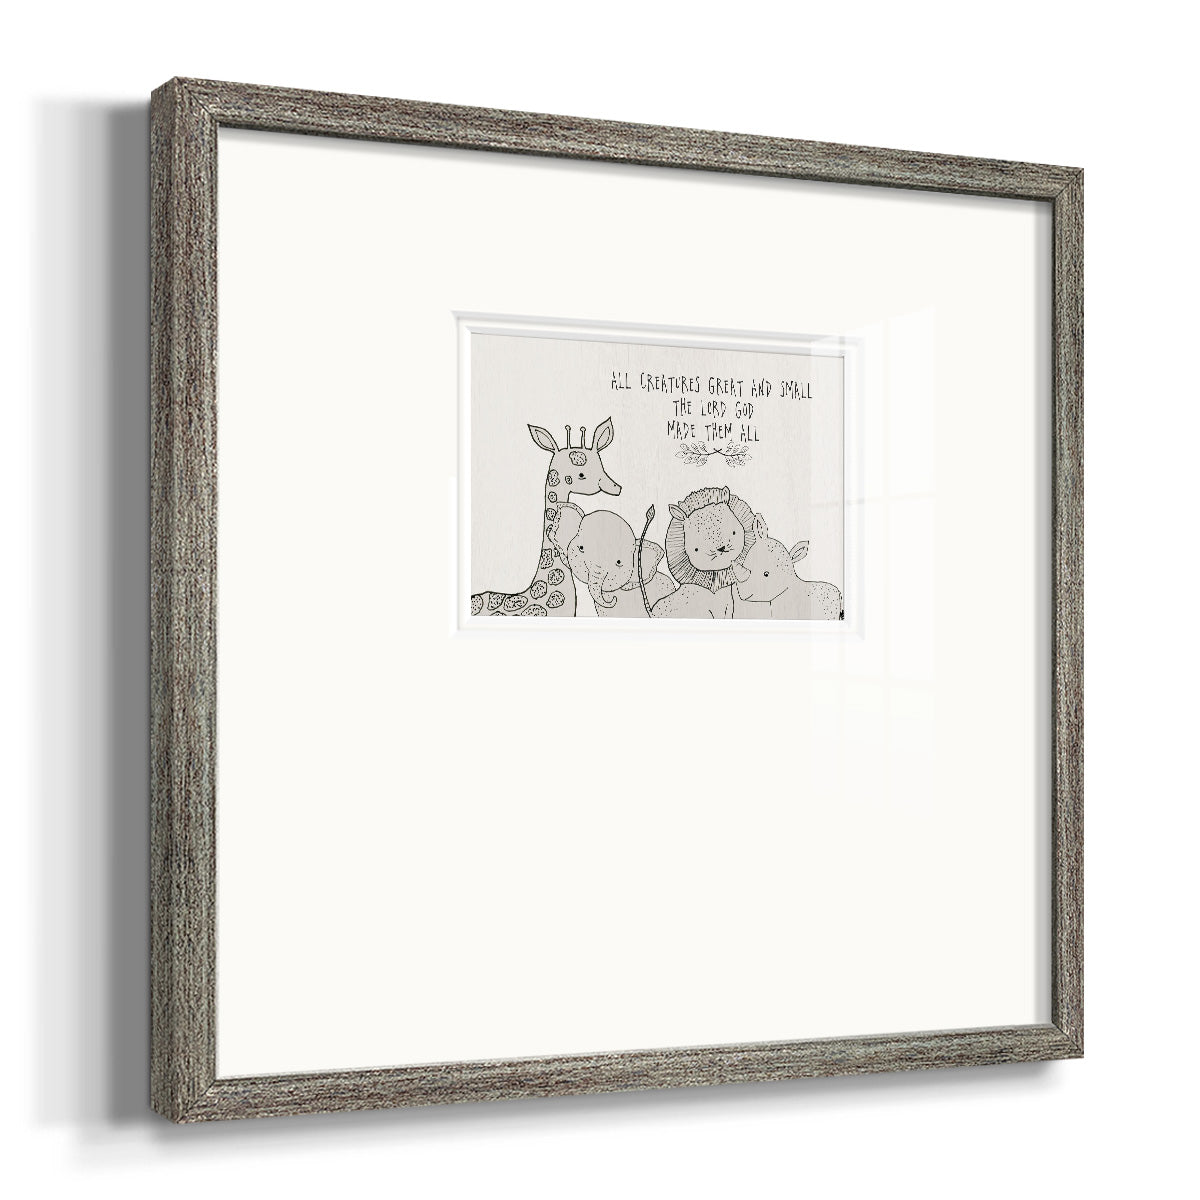 All Creatures Premium Framed Print Double Matboard